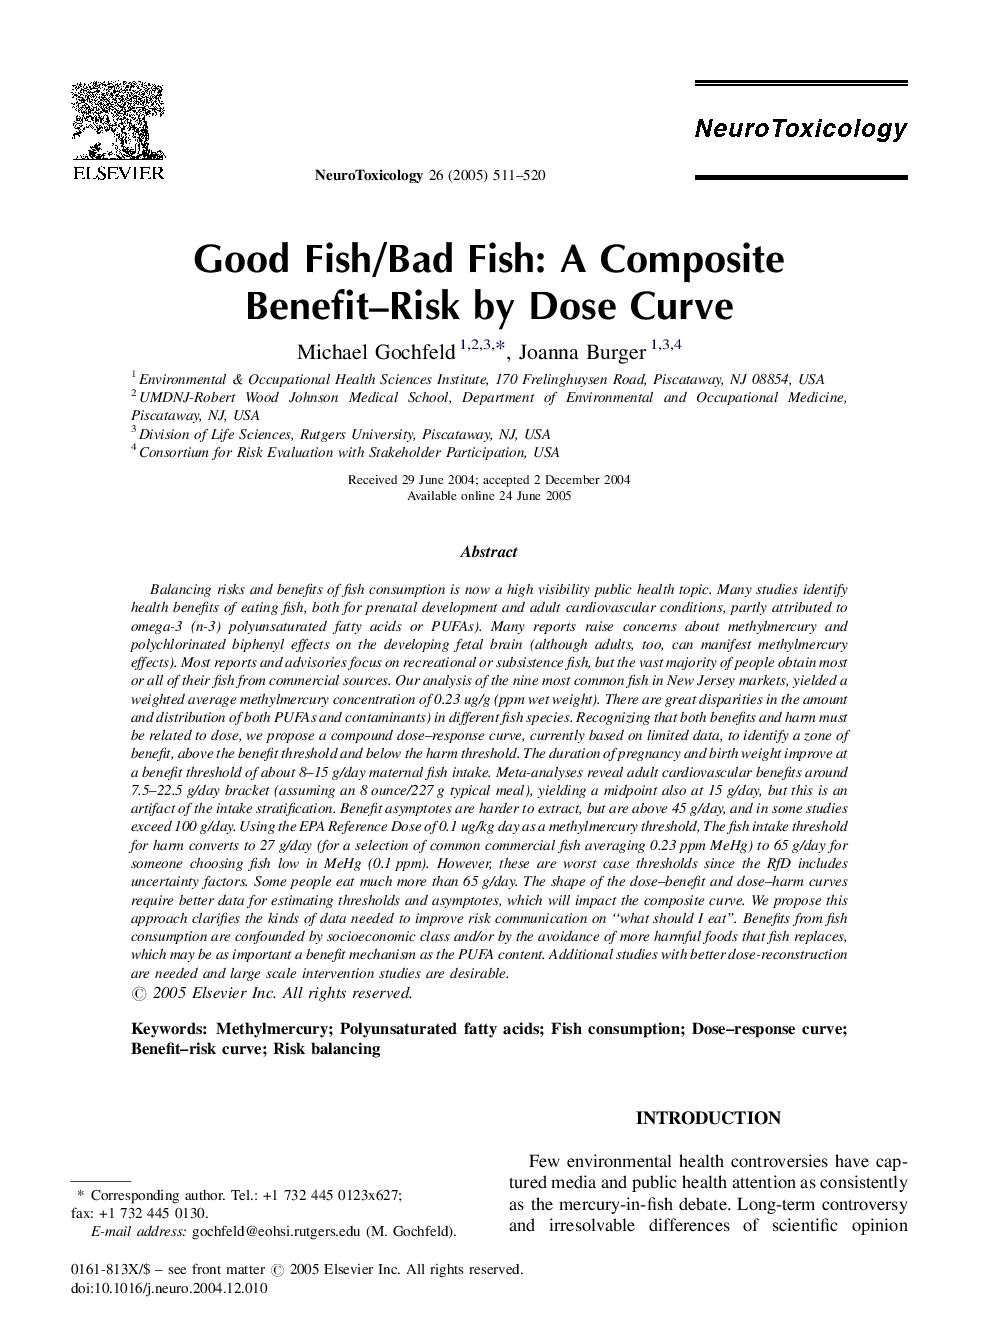 Good Fish/Bad Fish: A Composite Benefit-Risk by Dose Curve